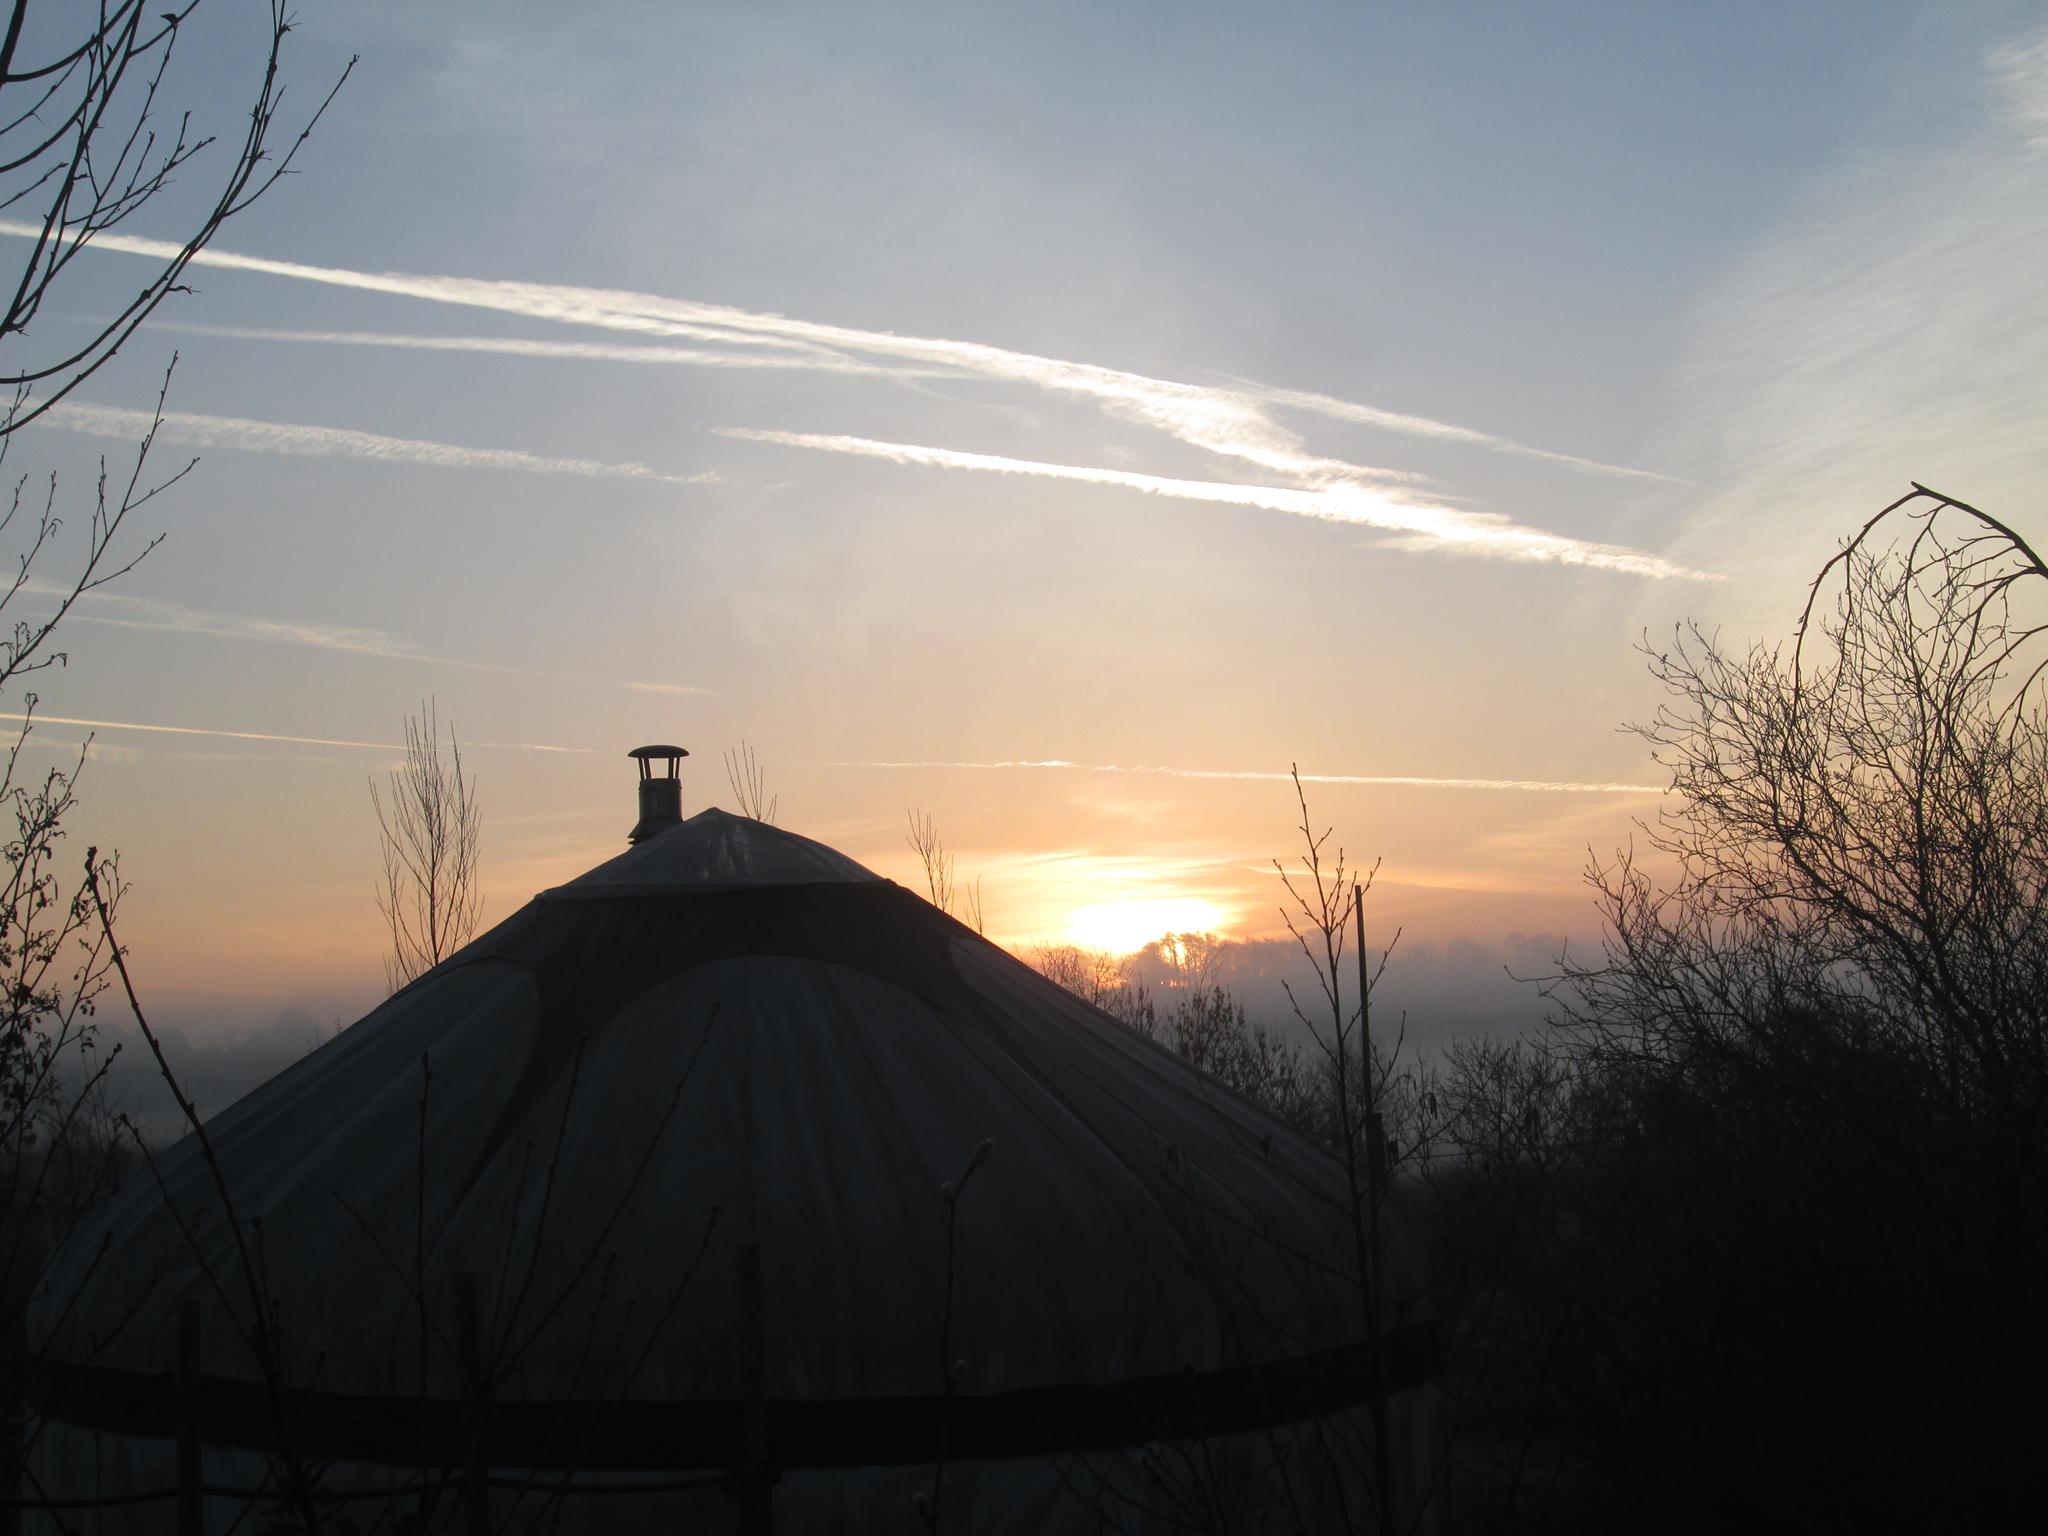 Spring retreat: a yurt in the mists of dawn